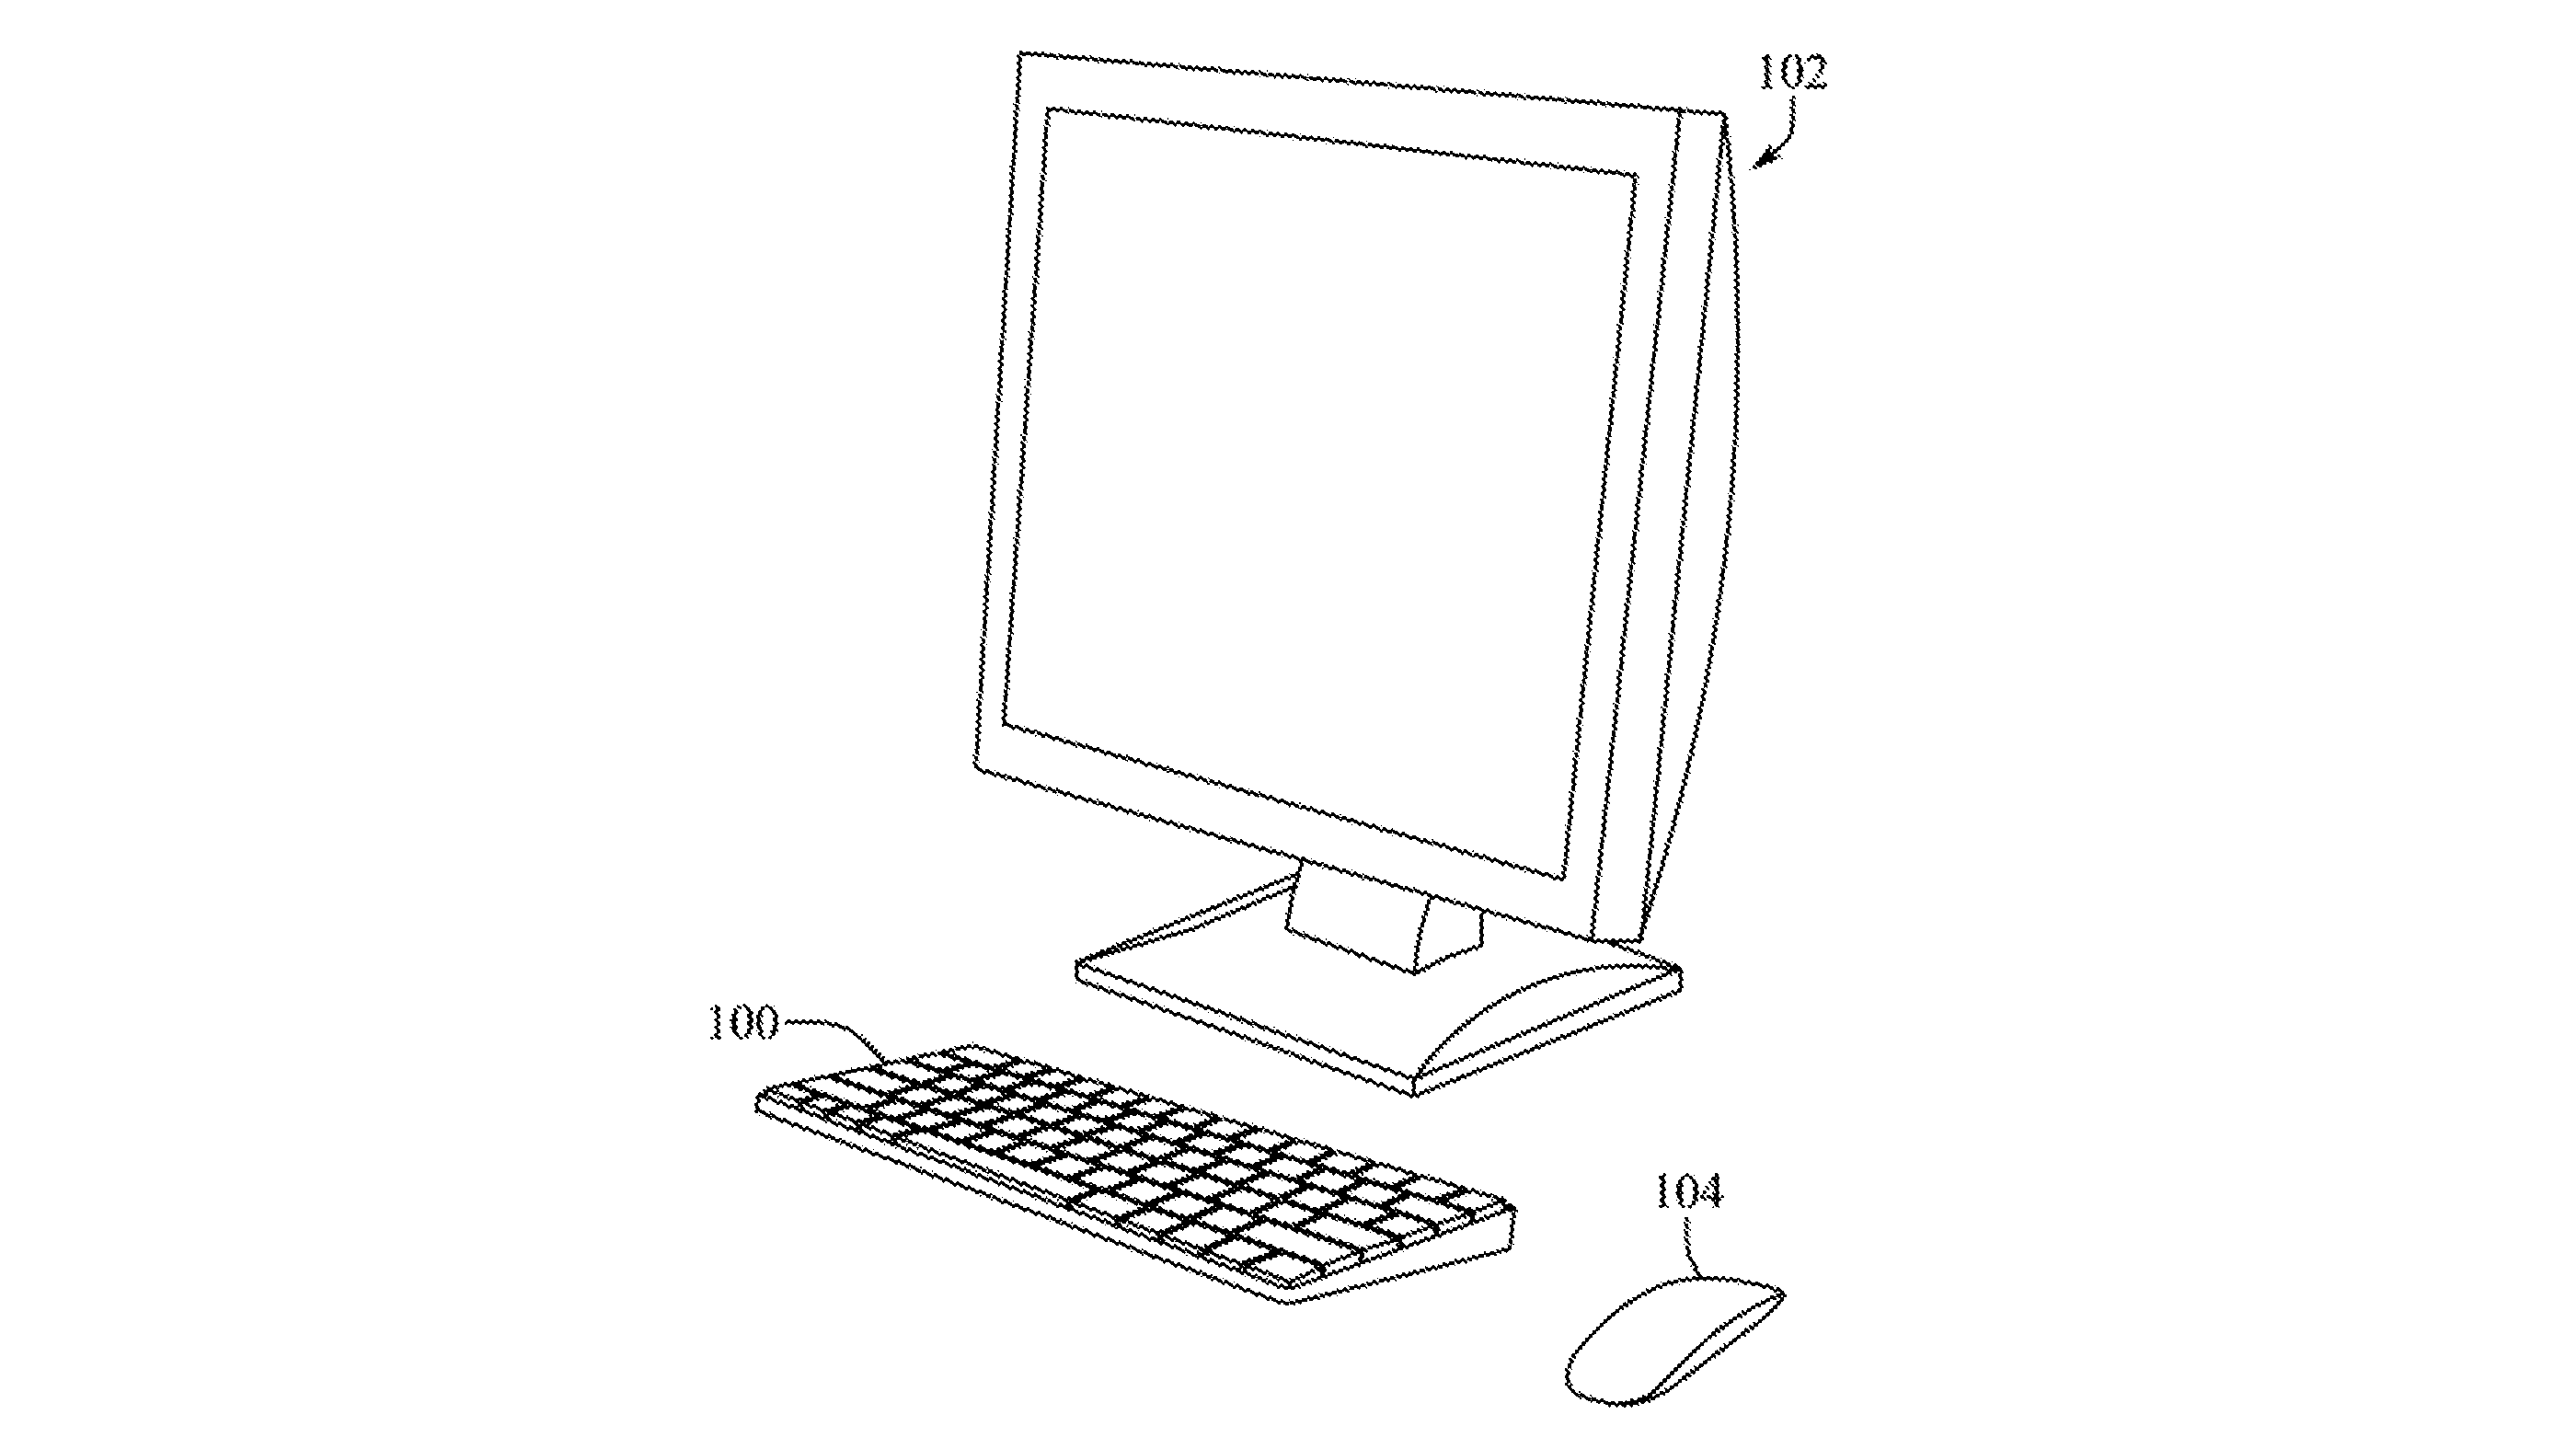 A patent drawing filed as part of Apple's USPTO patent application for a computer in an input device which details how the company could integrate a whole Mac inside a Magic Keyboard. The drawing depicts a setup consisting of a Mac/Magic Keyboard hybrid with a wireless keyboard and an external monitor.